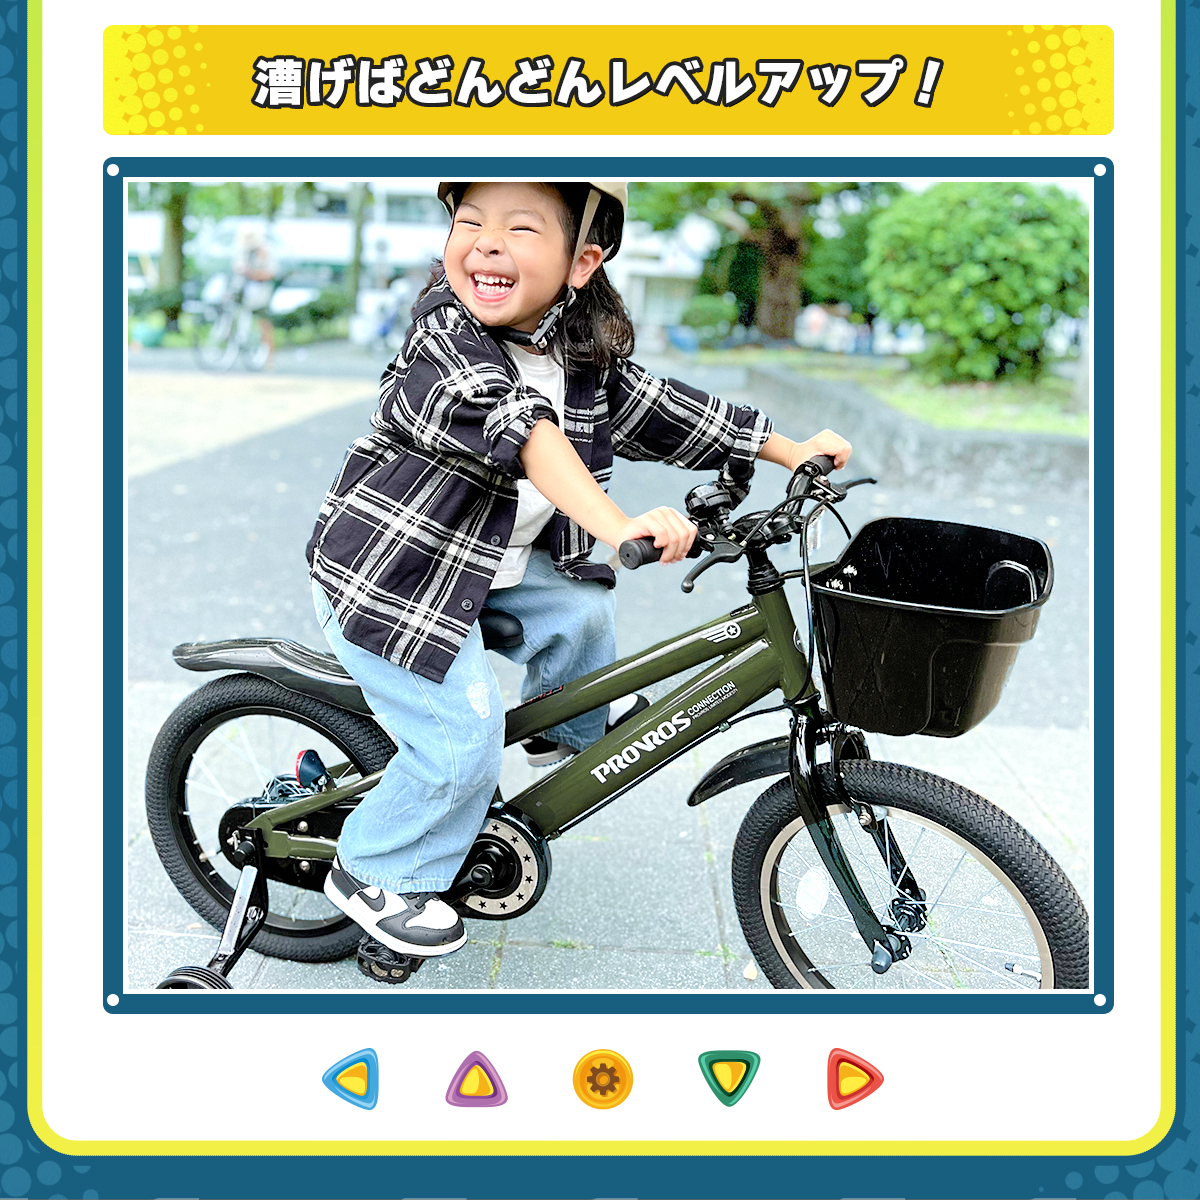 PROVROS 子供用自転車 補助輪付き 16インチ キッズ 幼児 4歳 5歳 6歳 カゴ ギフト 男の子 お祝い 誕生日 クリスマス PKM-16｜procycle｜14